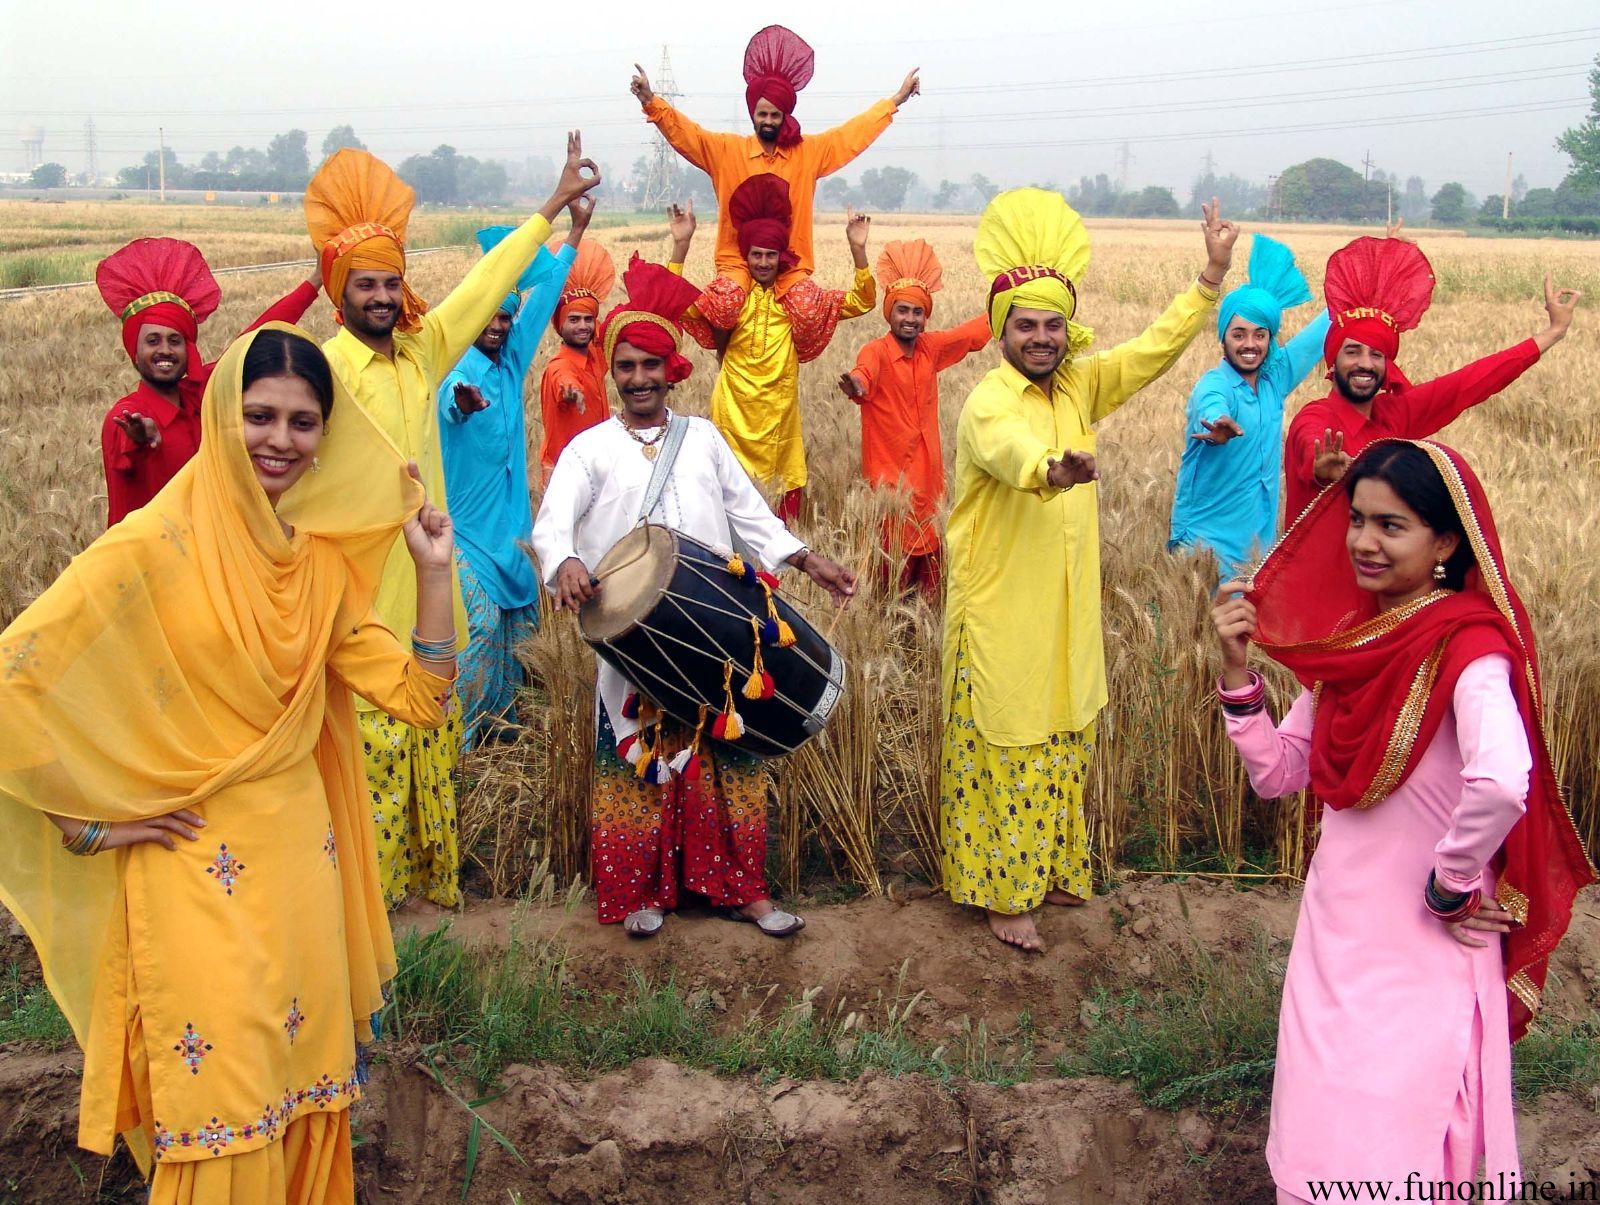 I am a free spirit and Lover of INDIA Baisakhi, the harvest festival